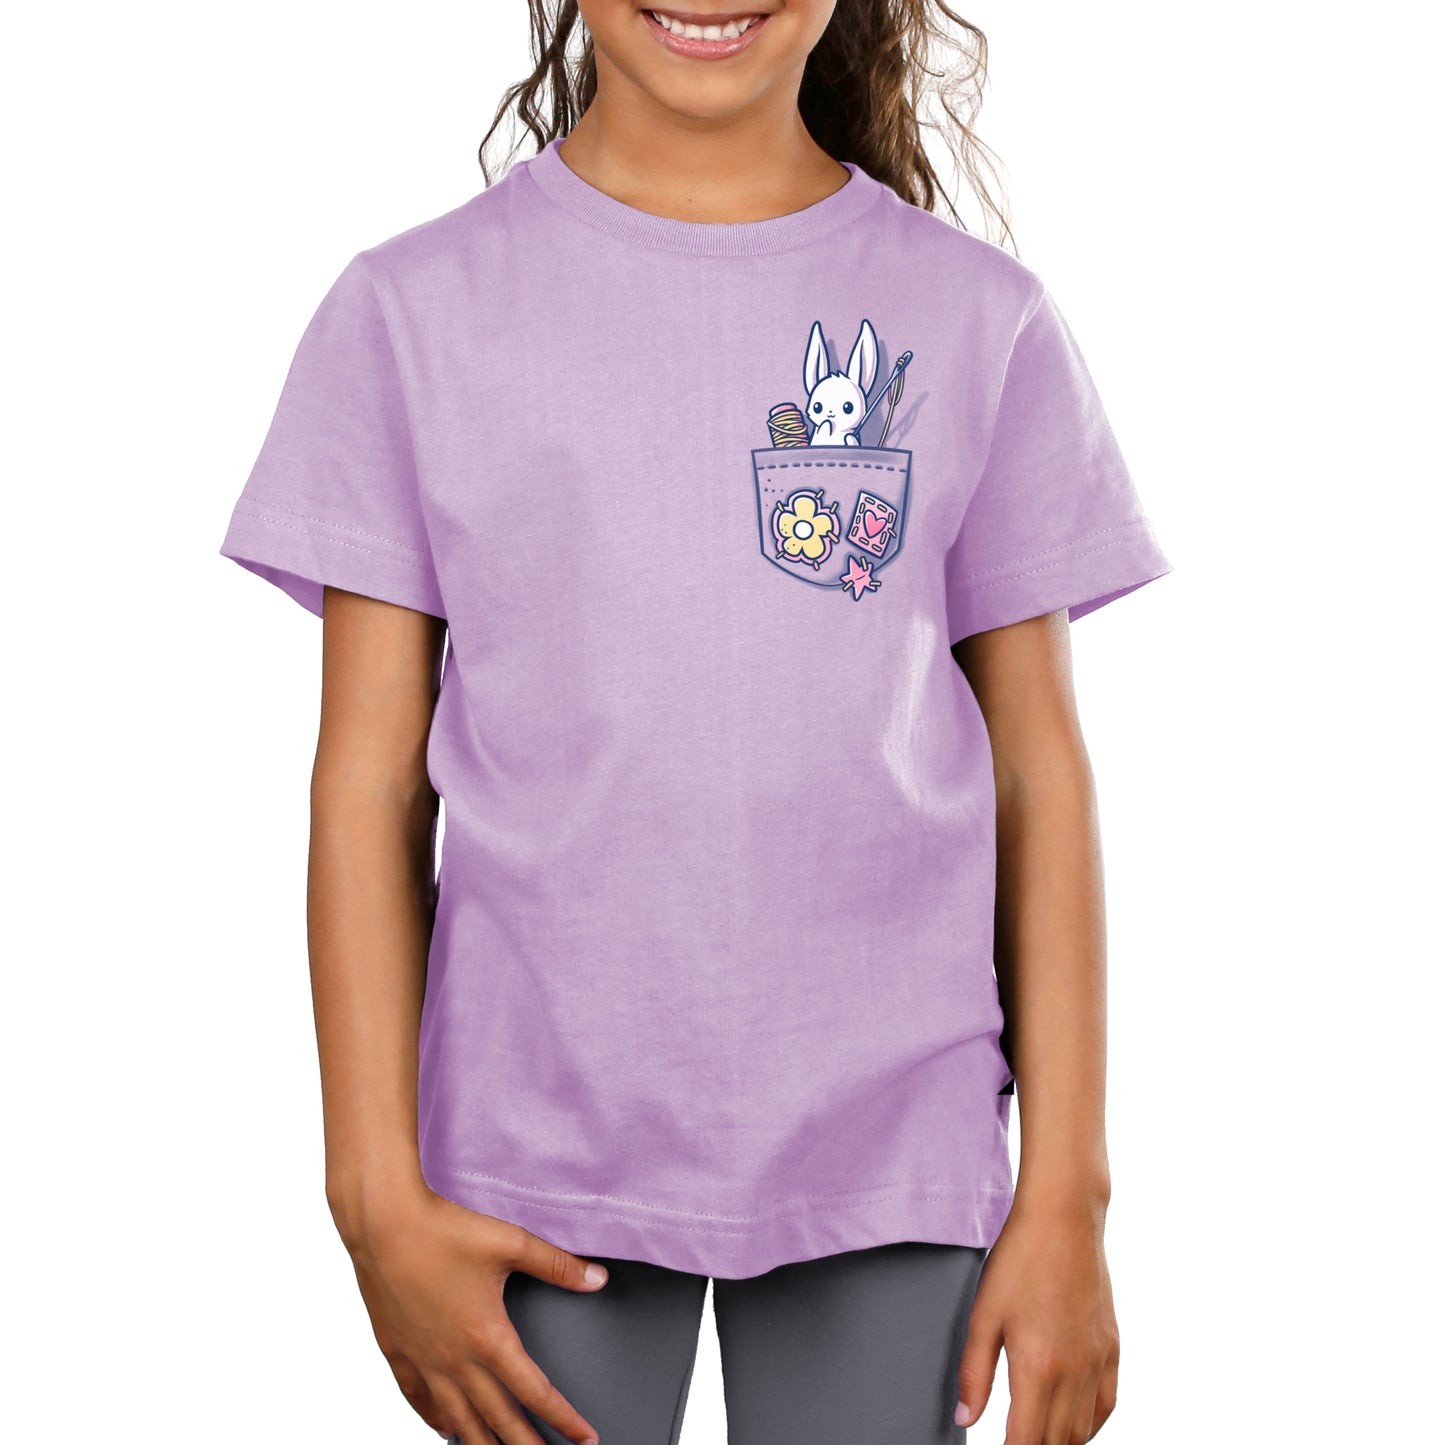 A girl wearing a lavender t-shirt with a Crafty Bunny in Your Pocket, showcasing her TeeTurtle project.